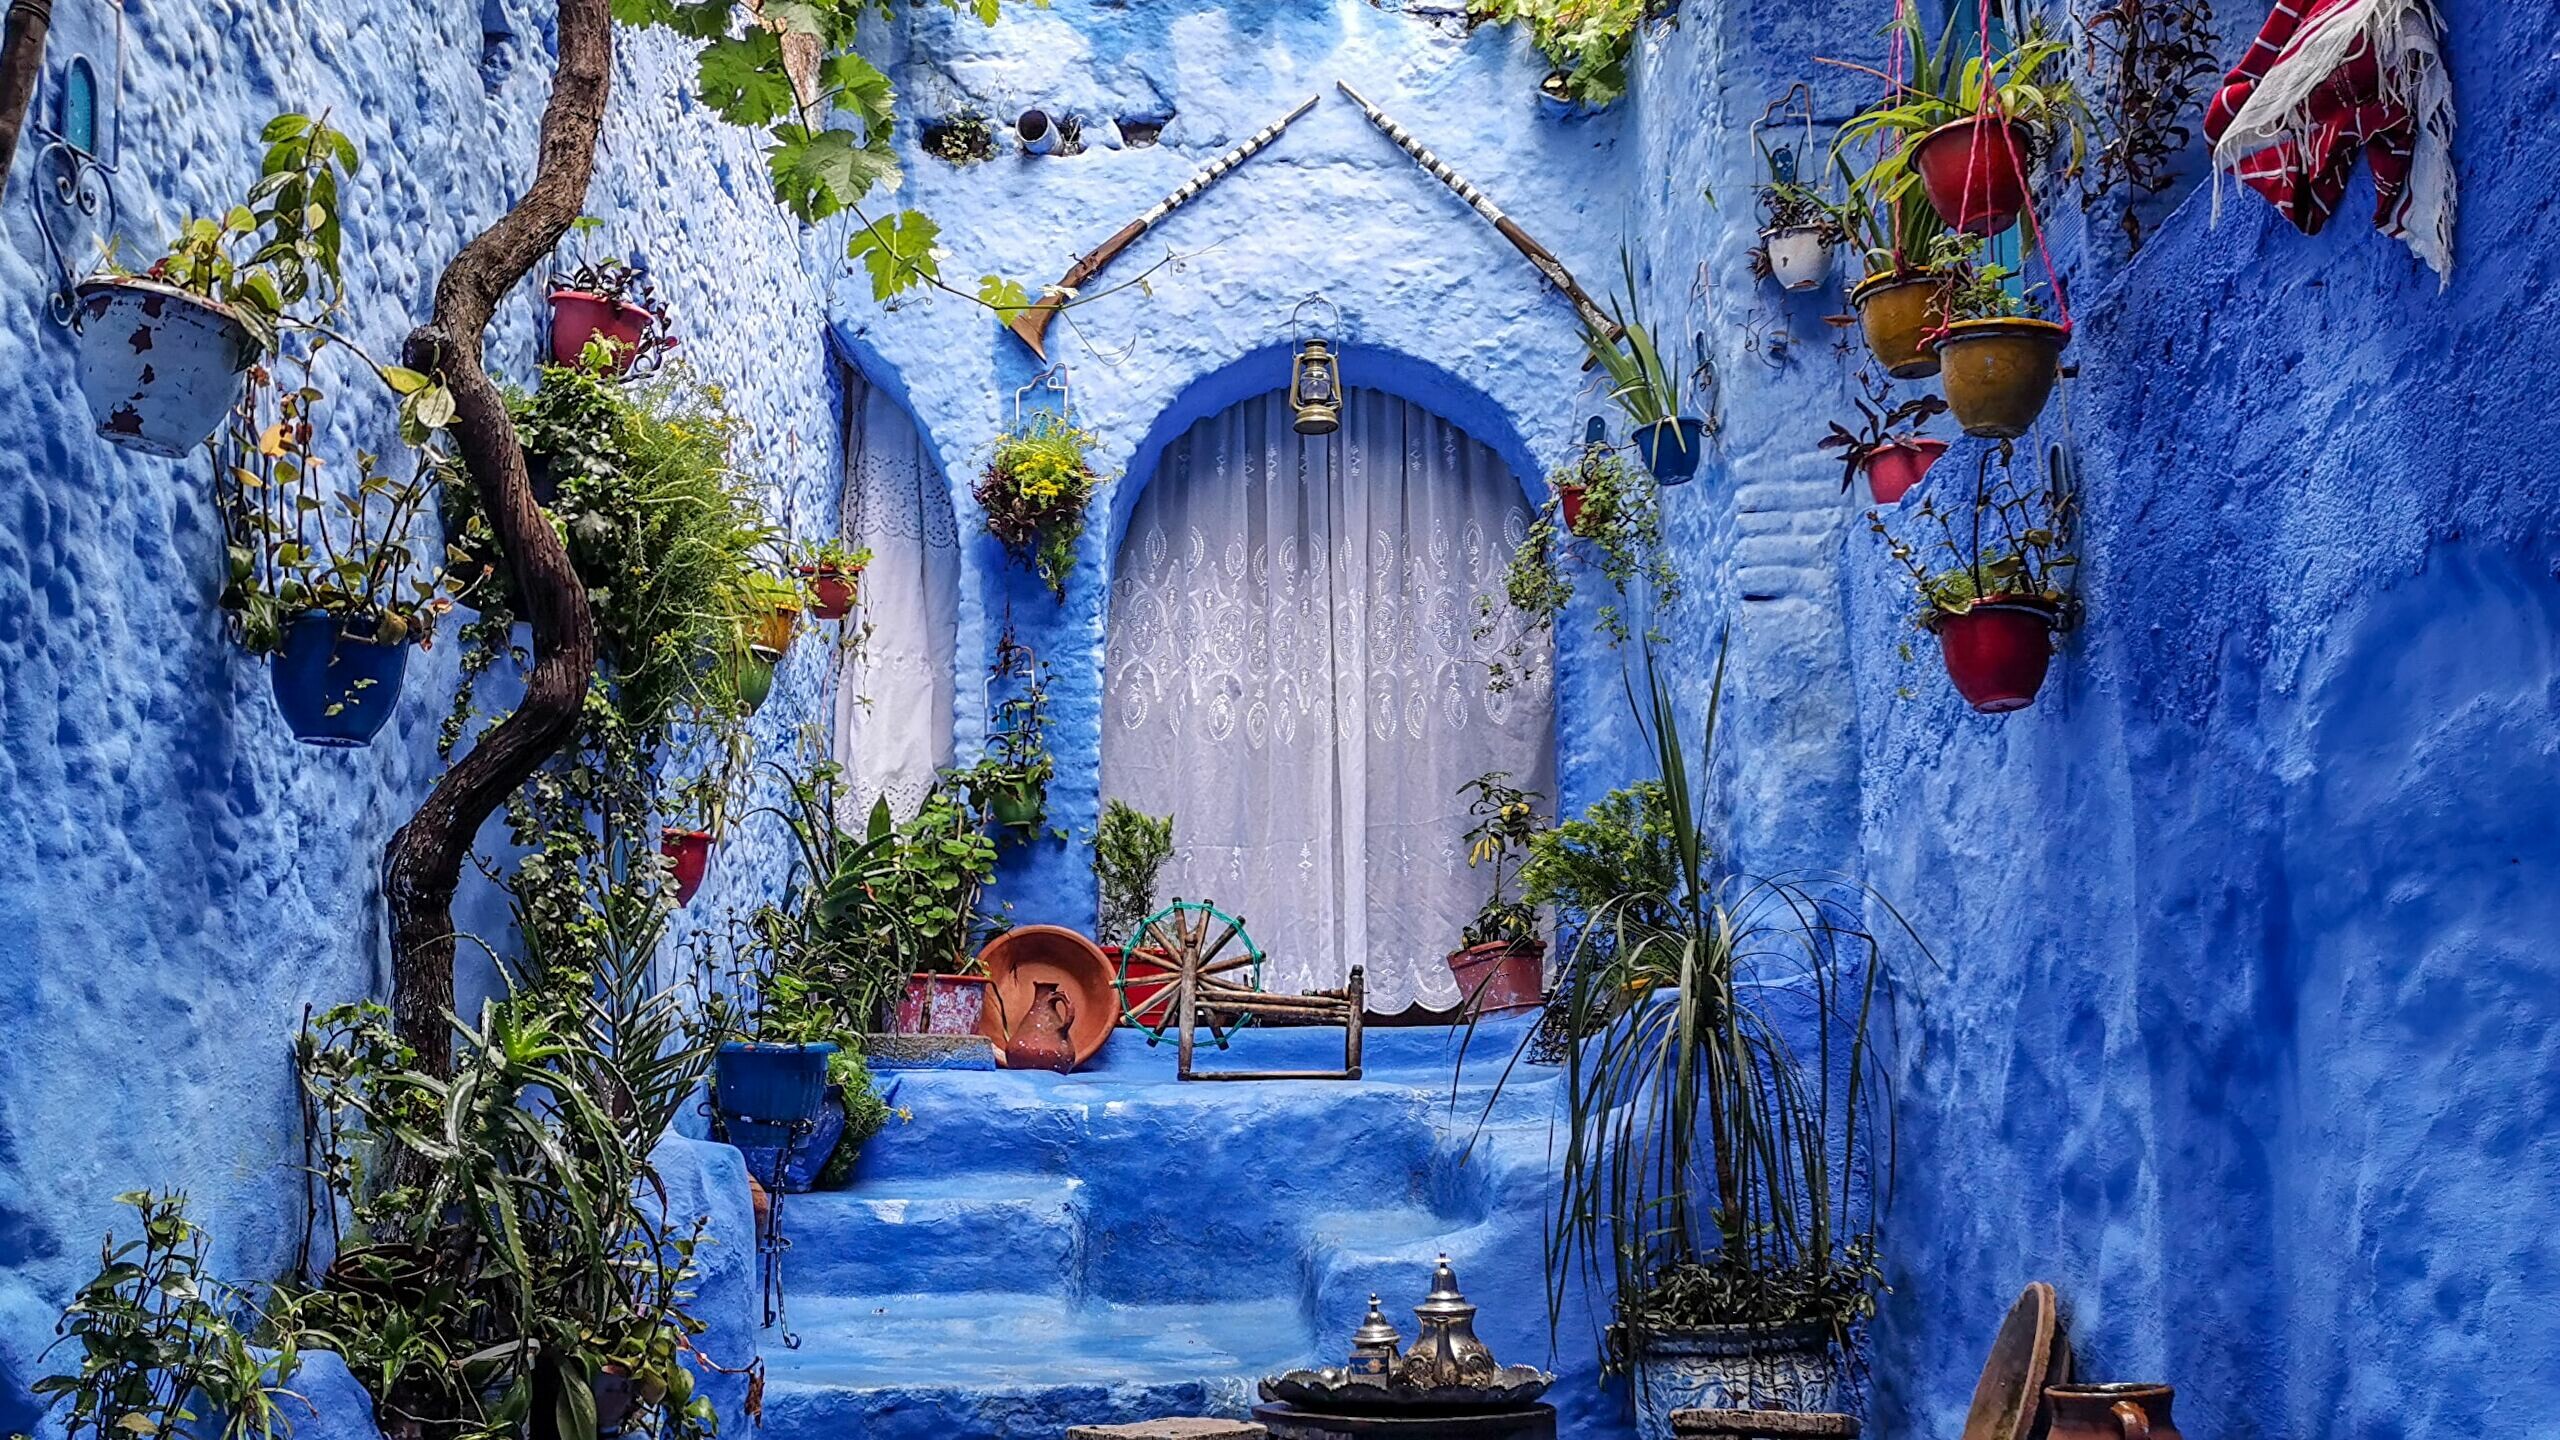 Morocco: Chefchaouen, Blue City, The country spans an area of 172,300 square miles. 2560x1440 HD Background.